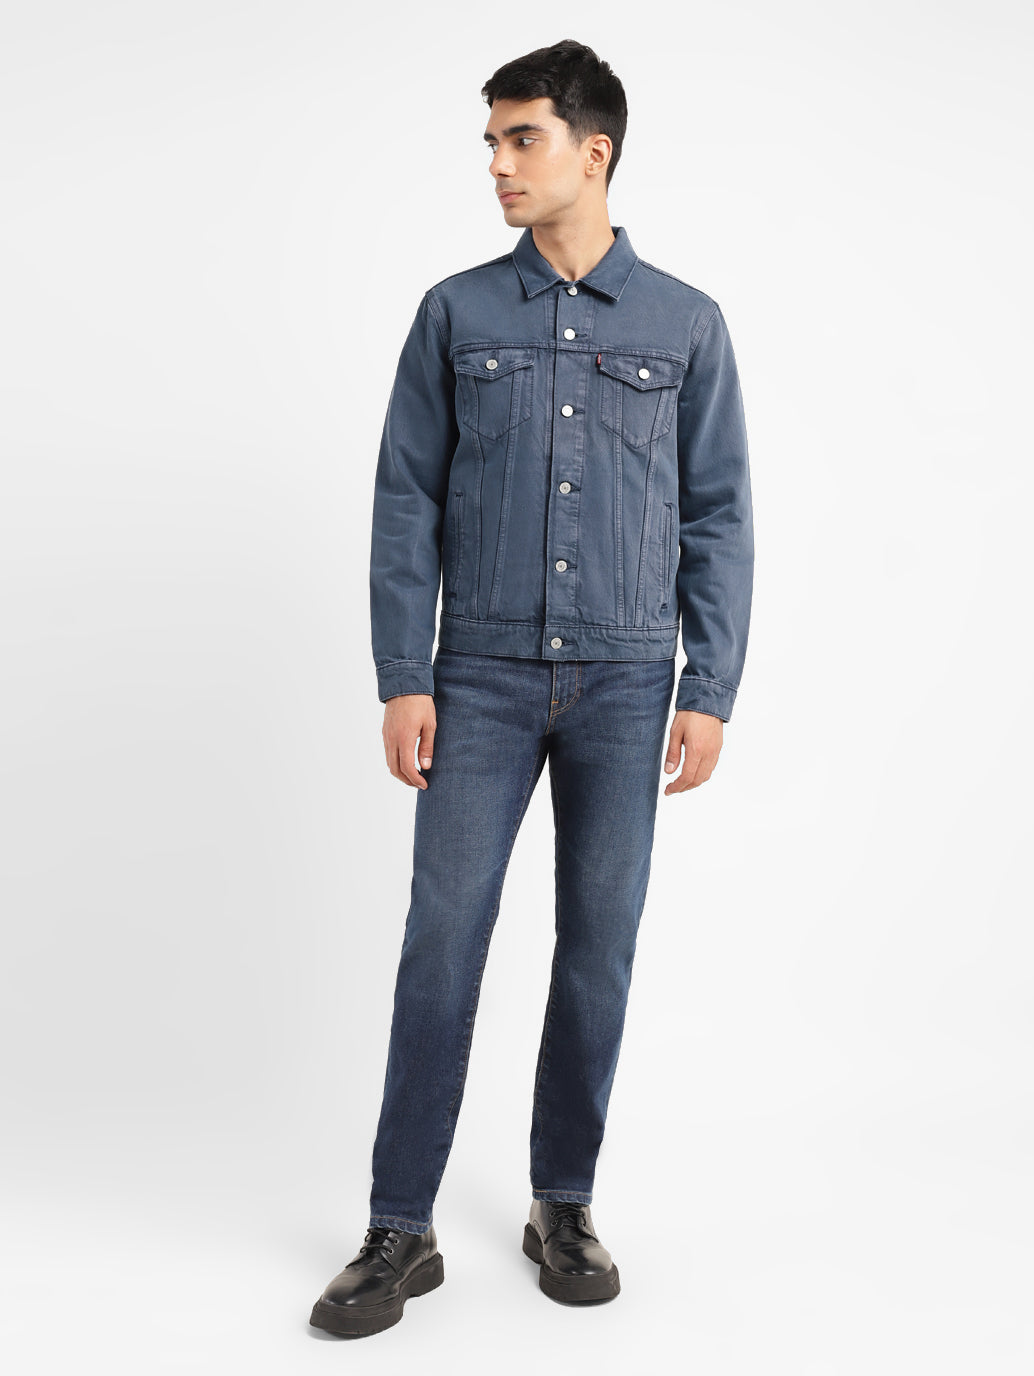 Warren Webber Denim jacket with rips: for sale at 27.99€ on Mecshopping.it